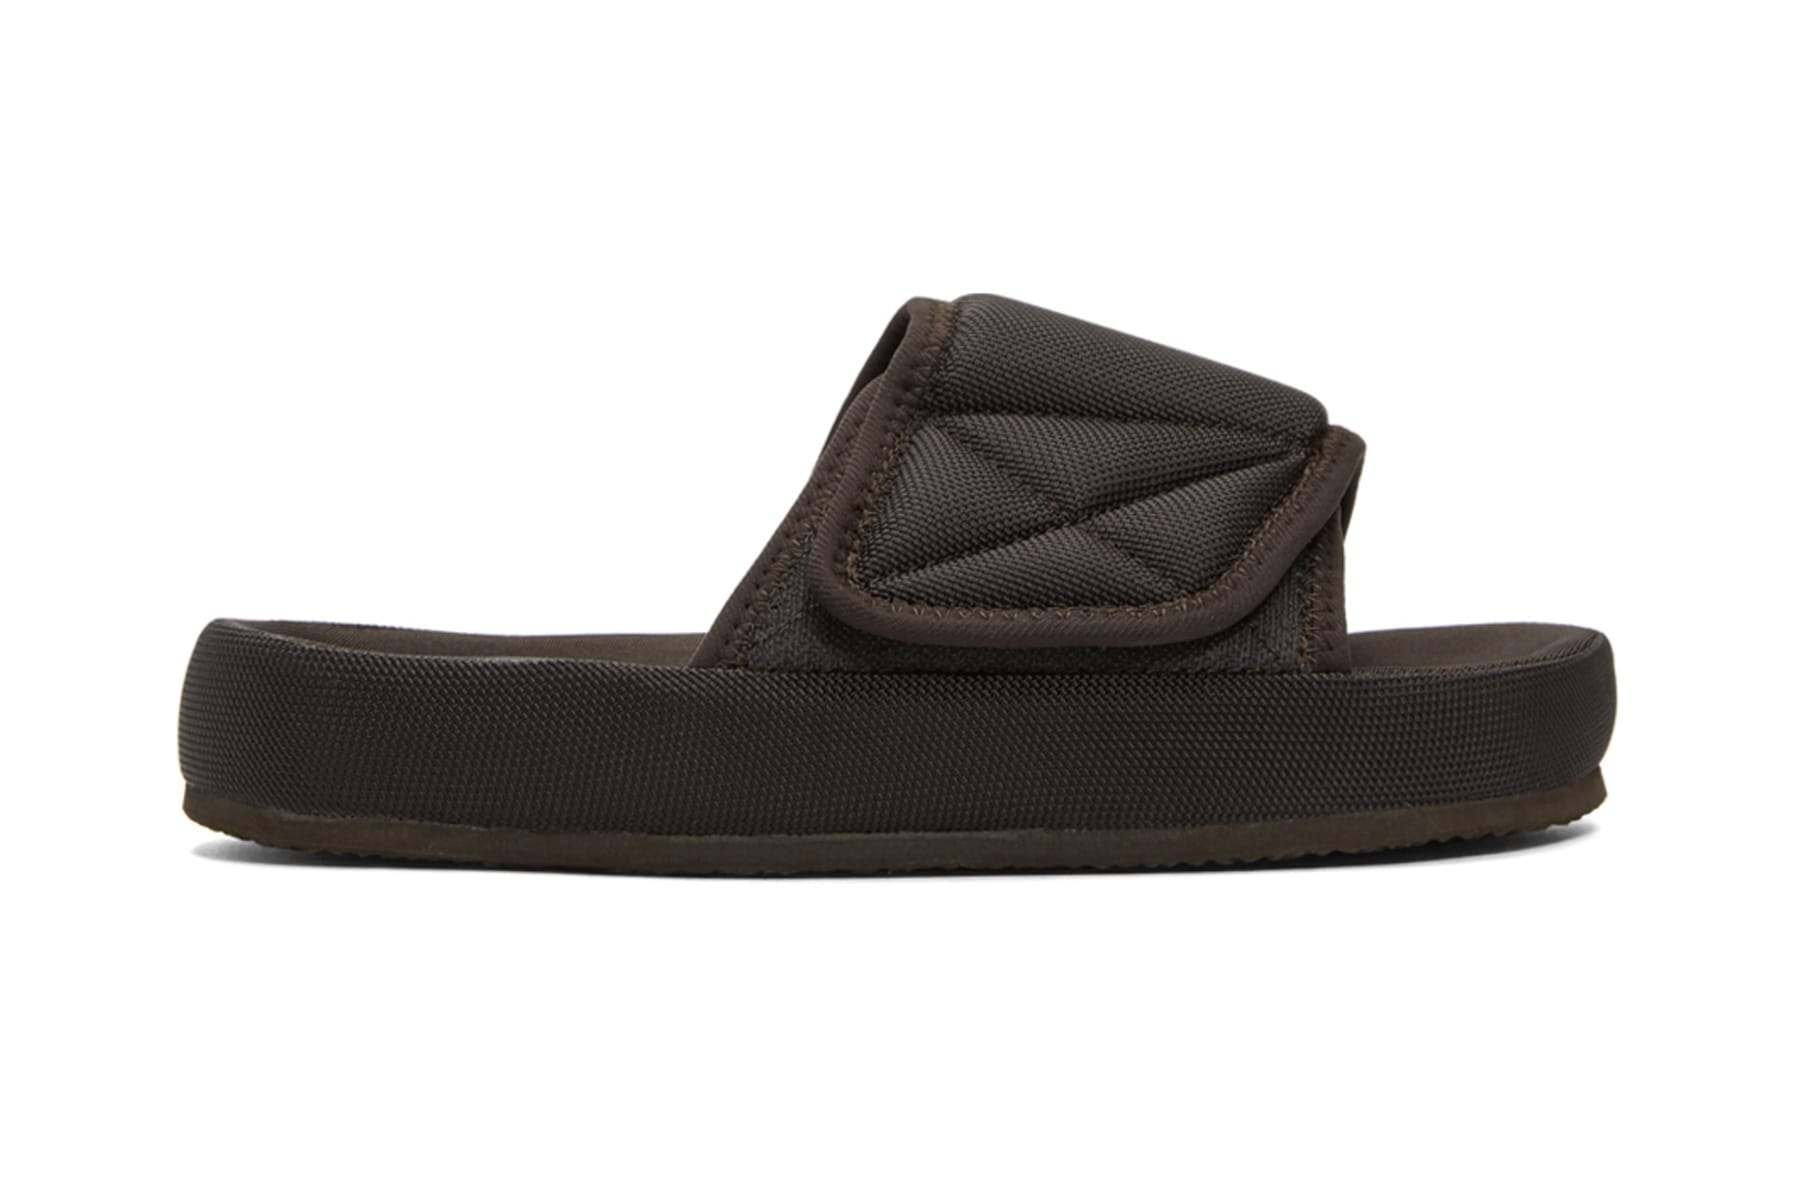 Kanye West YEEZY Slides Available Now 